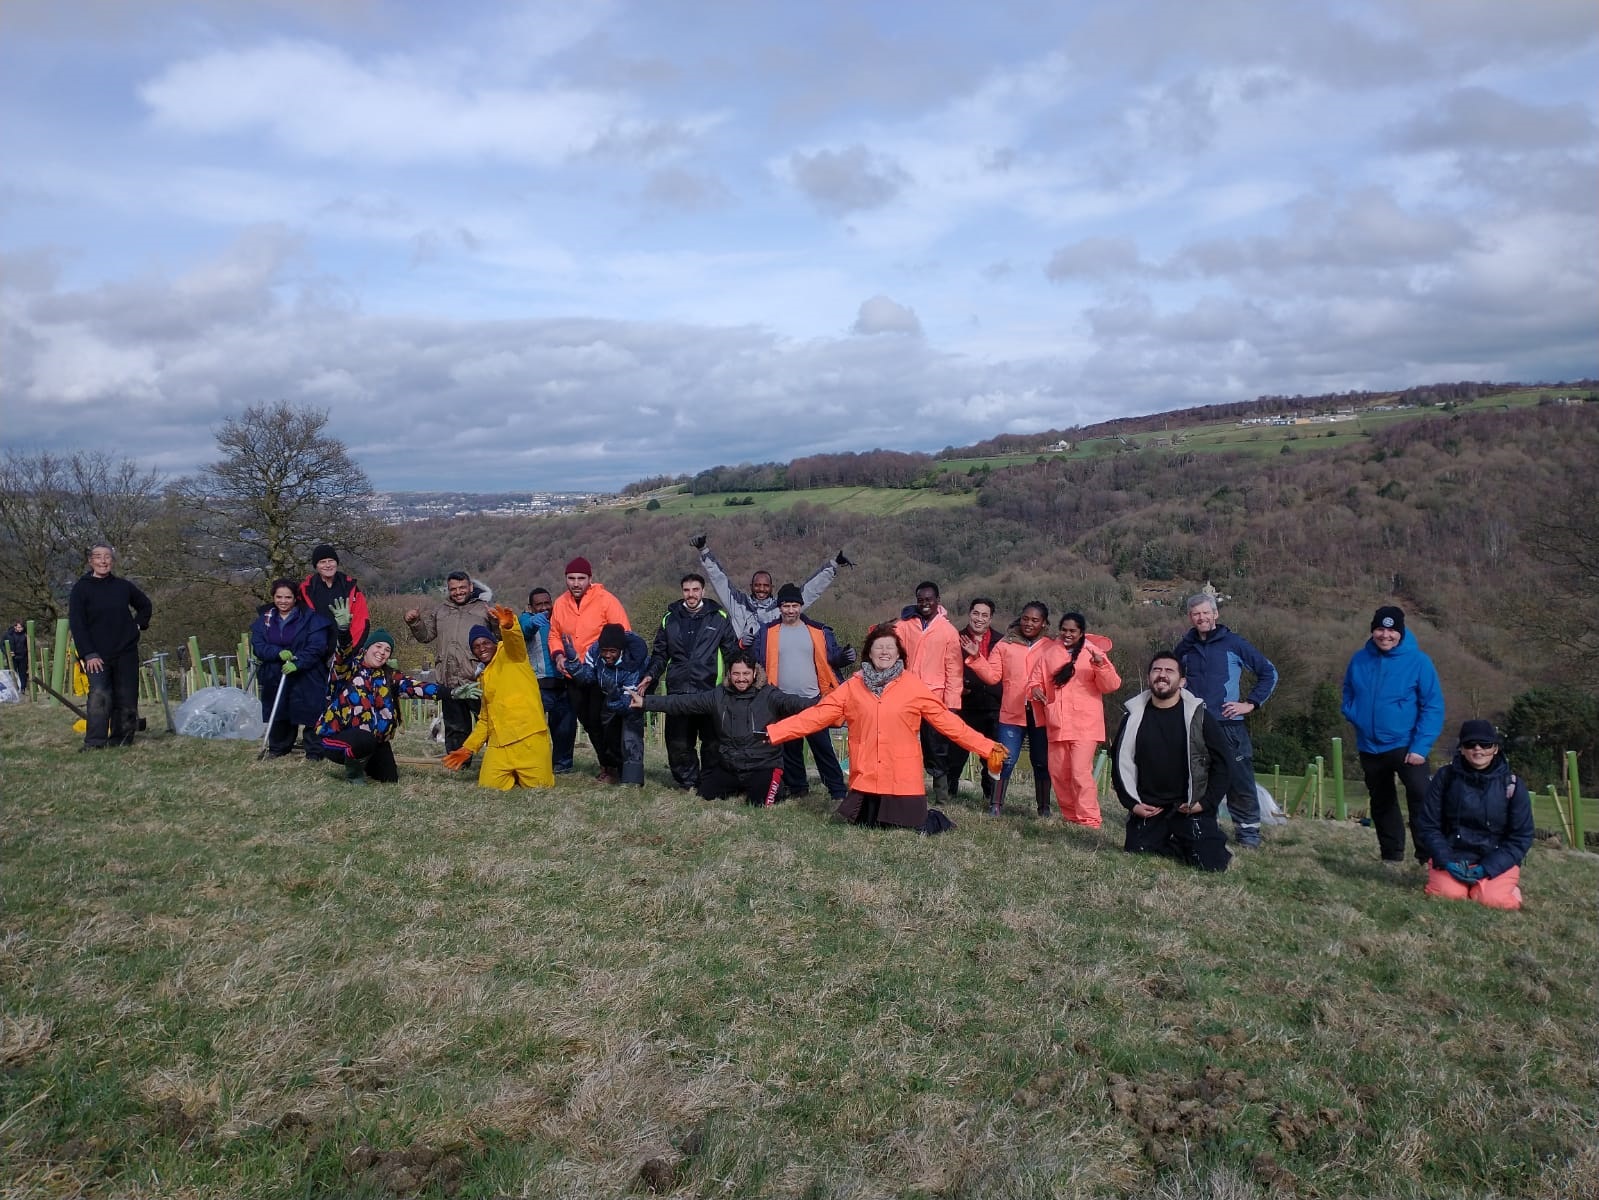 Group of people on a hill planting trees